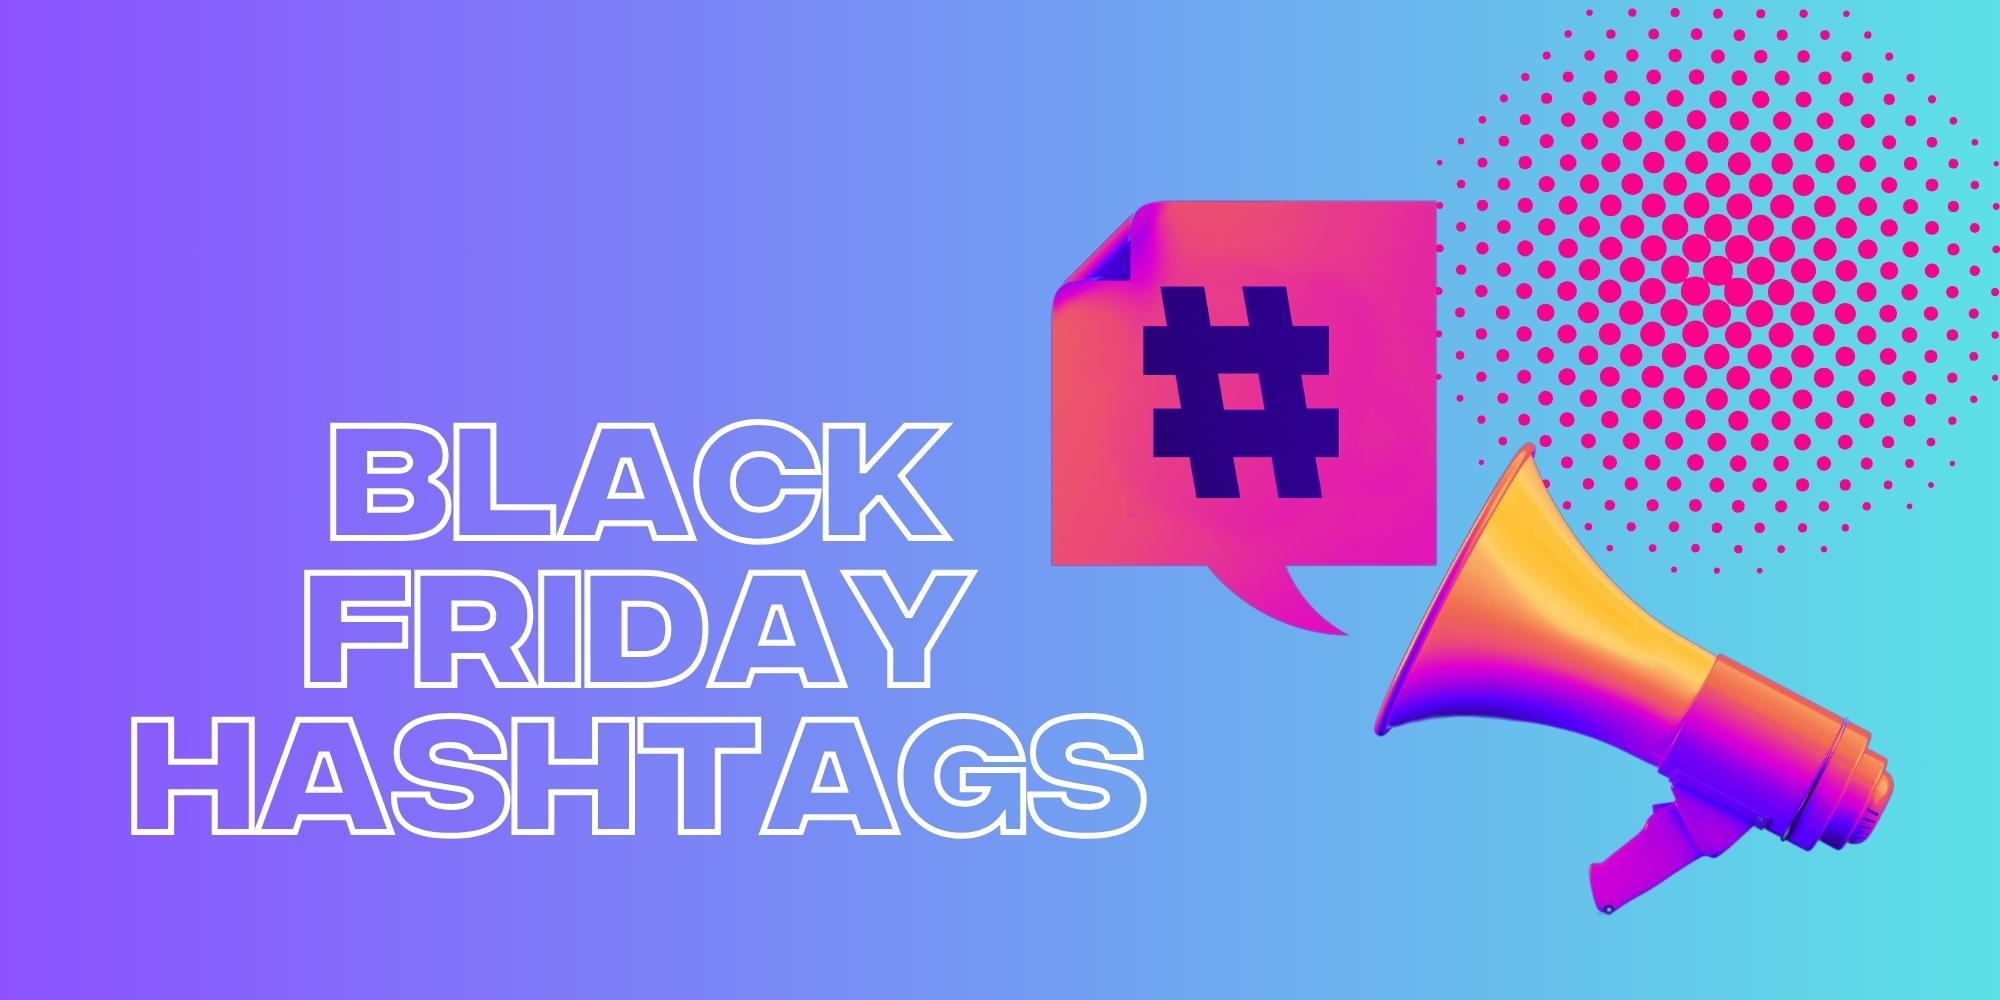 How To Best Engage With Black Friday Hashtags